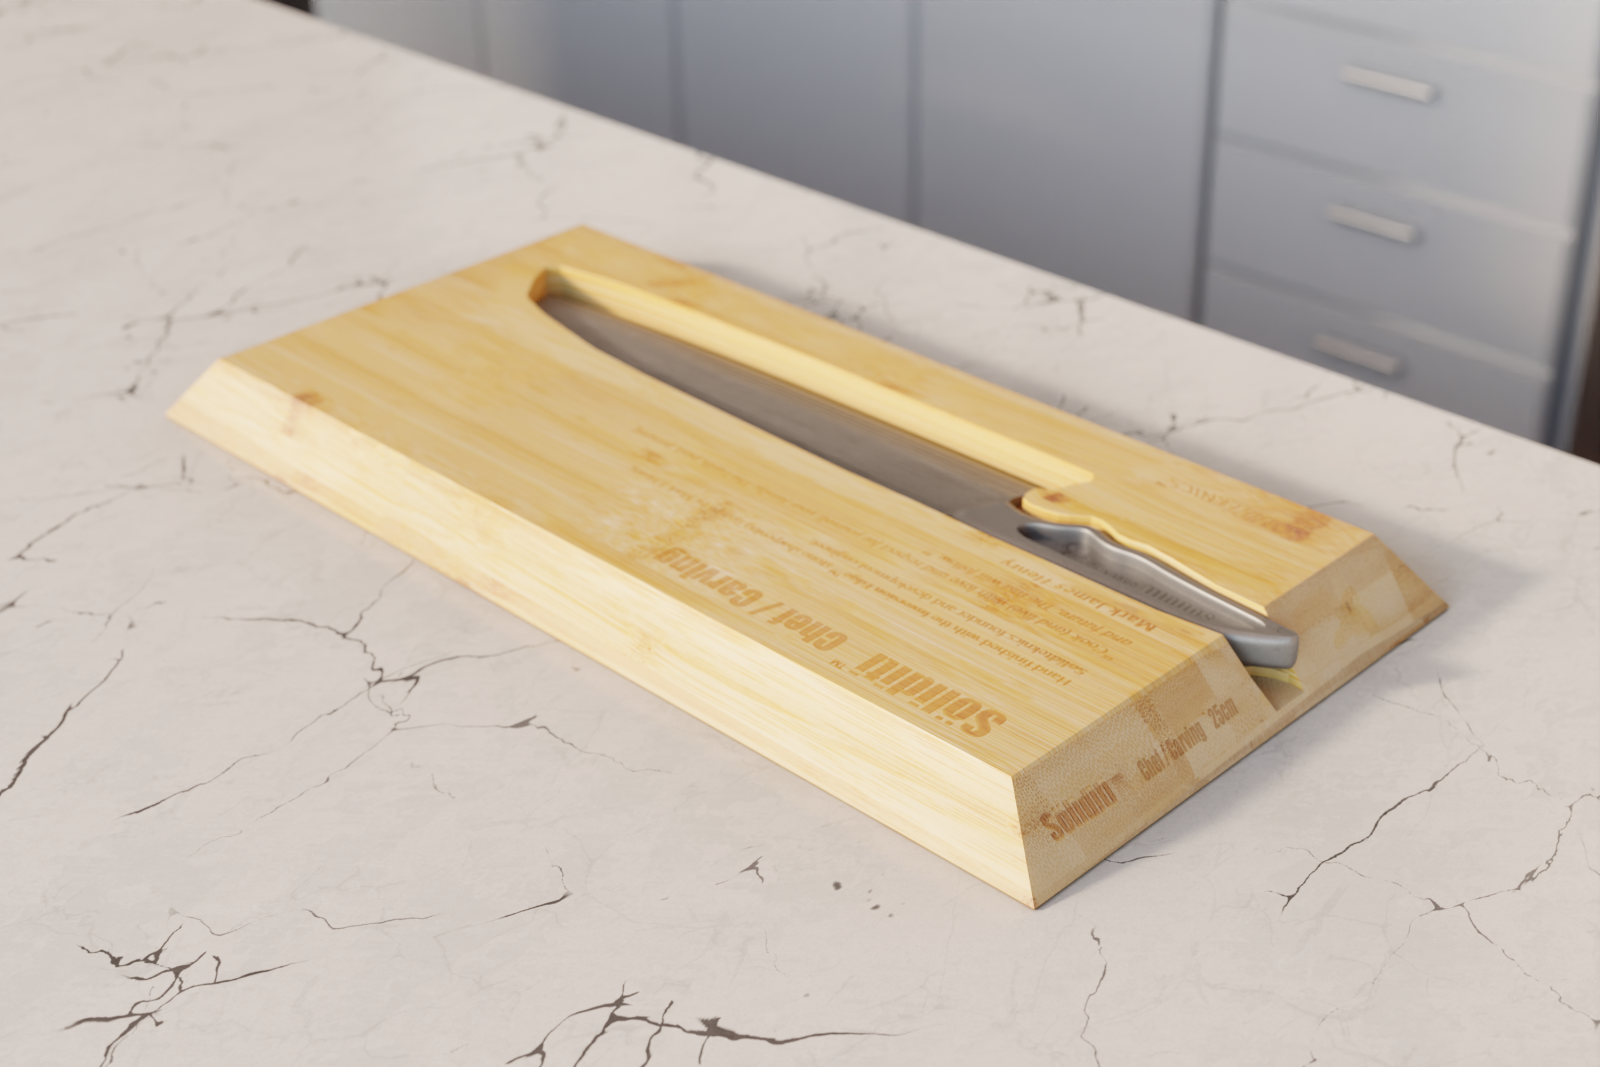 https://www.solidteknics.com/assets/images/chopping-board-25cm-carving.png